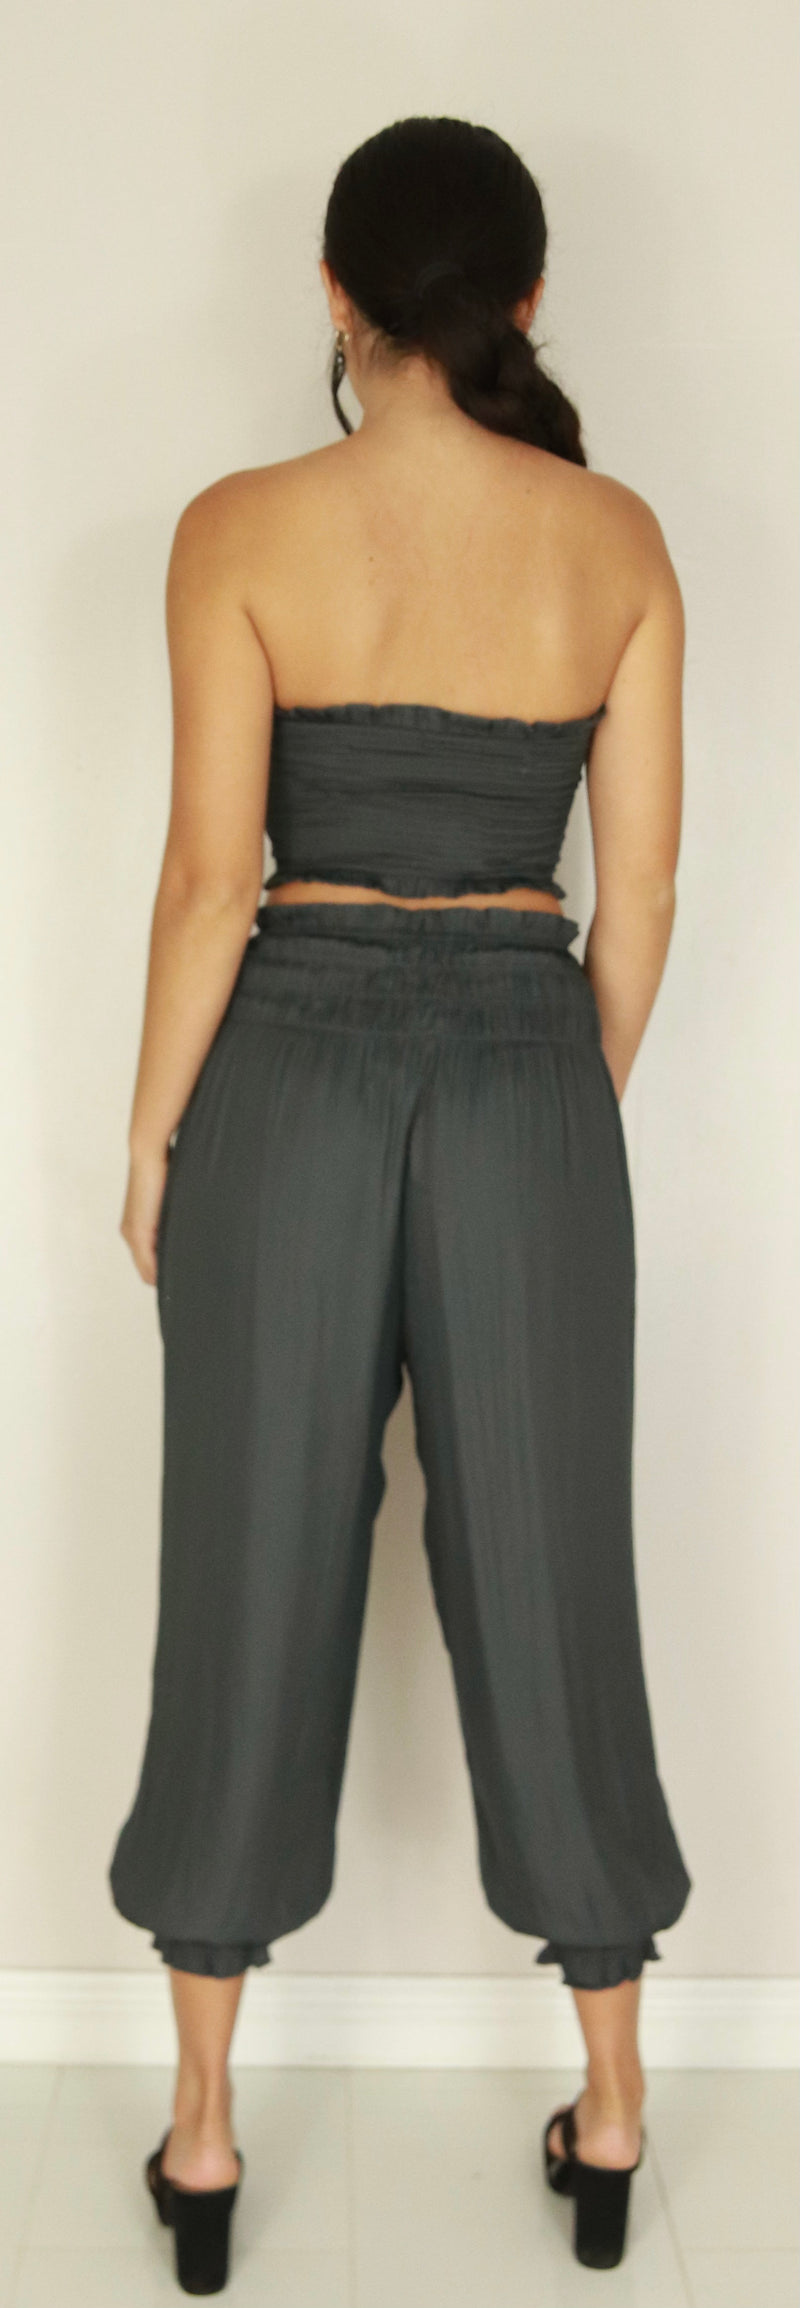 Jeans Warehouse Hawaii - SOLID WOVEN PANTS - SMOCKED WAIST JOGGER | By MIOU MUSE